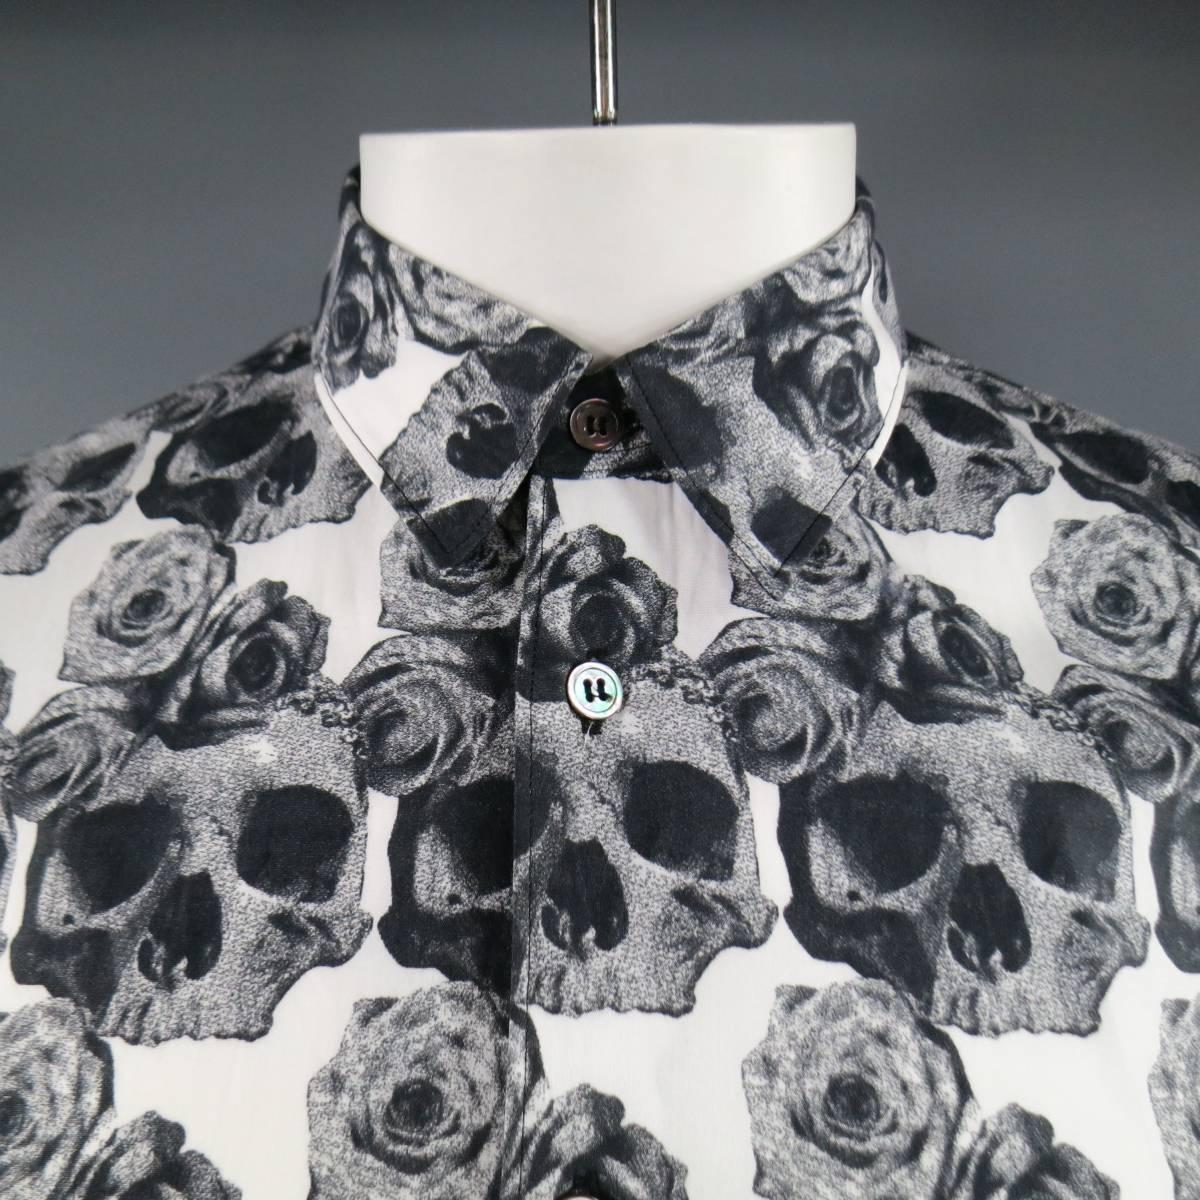 COMME des GARCONS Long Sleeve Shirt consists of cotton material in a black and white color tone. Designed with a slim pointed collar, button-up front, skull and rose print throughout body of shit. Single button cuff, 3/4 length sleeve and cropped